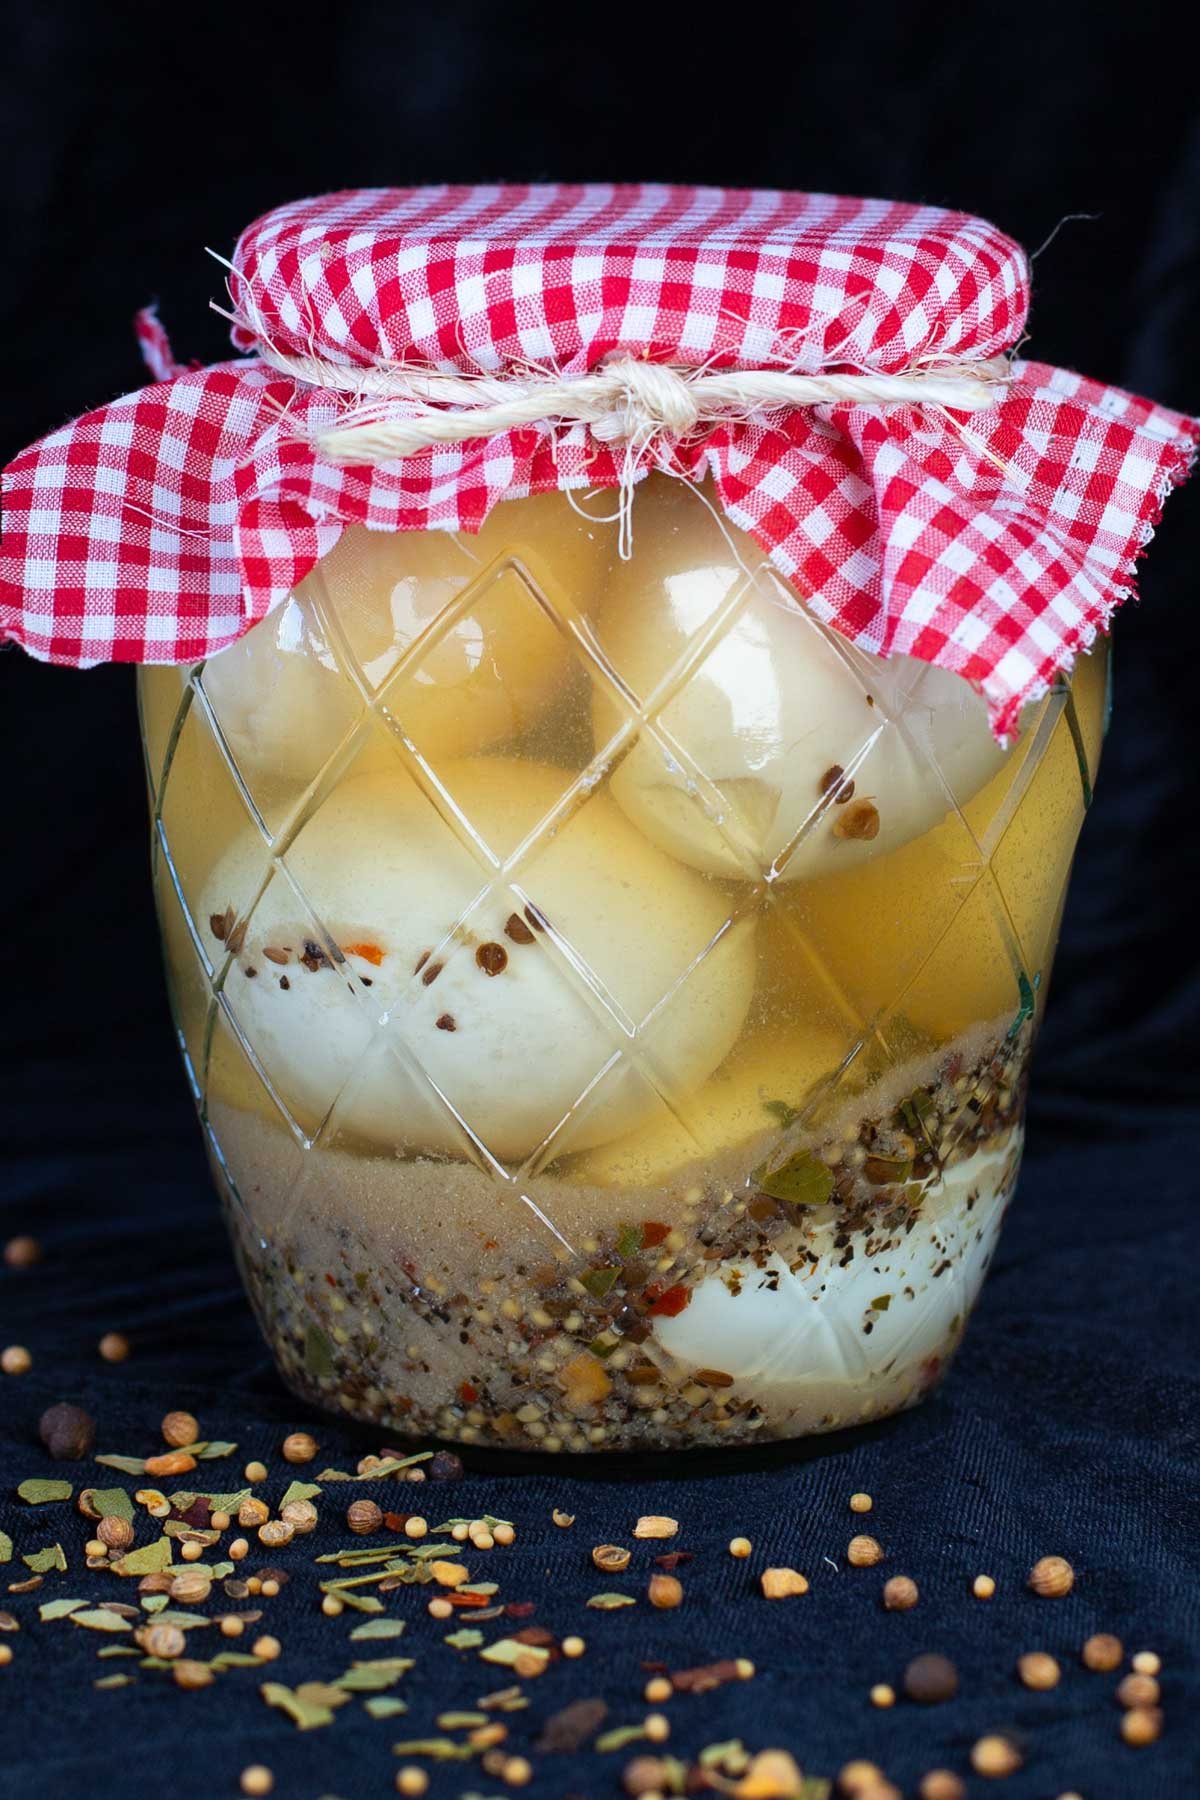 Glass jar of pickled egg with red checkered cloth lid cover.